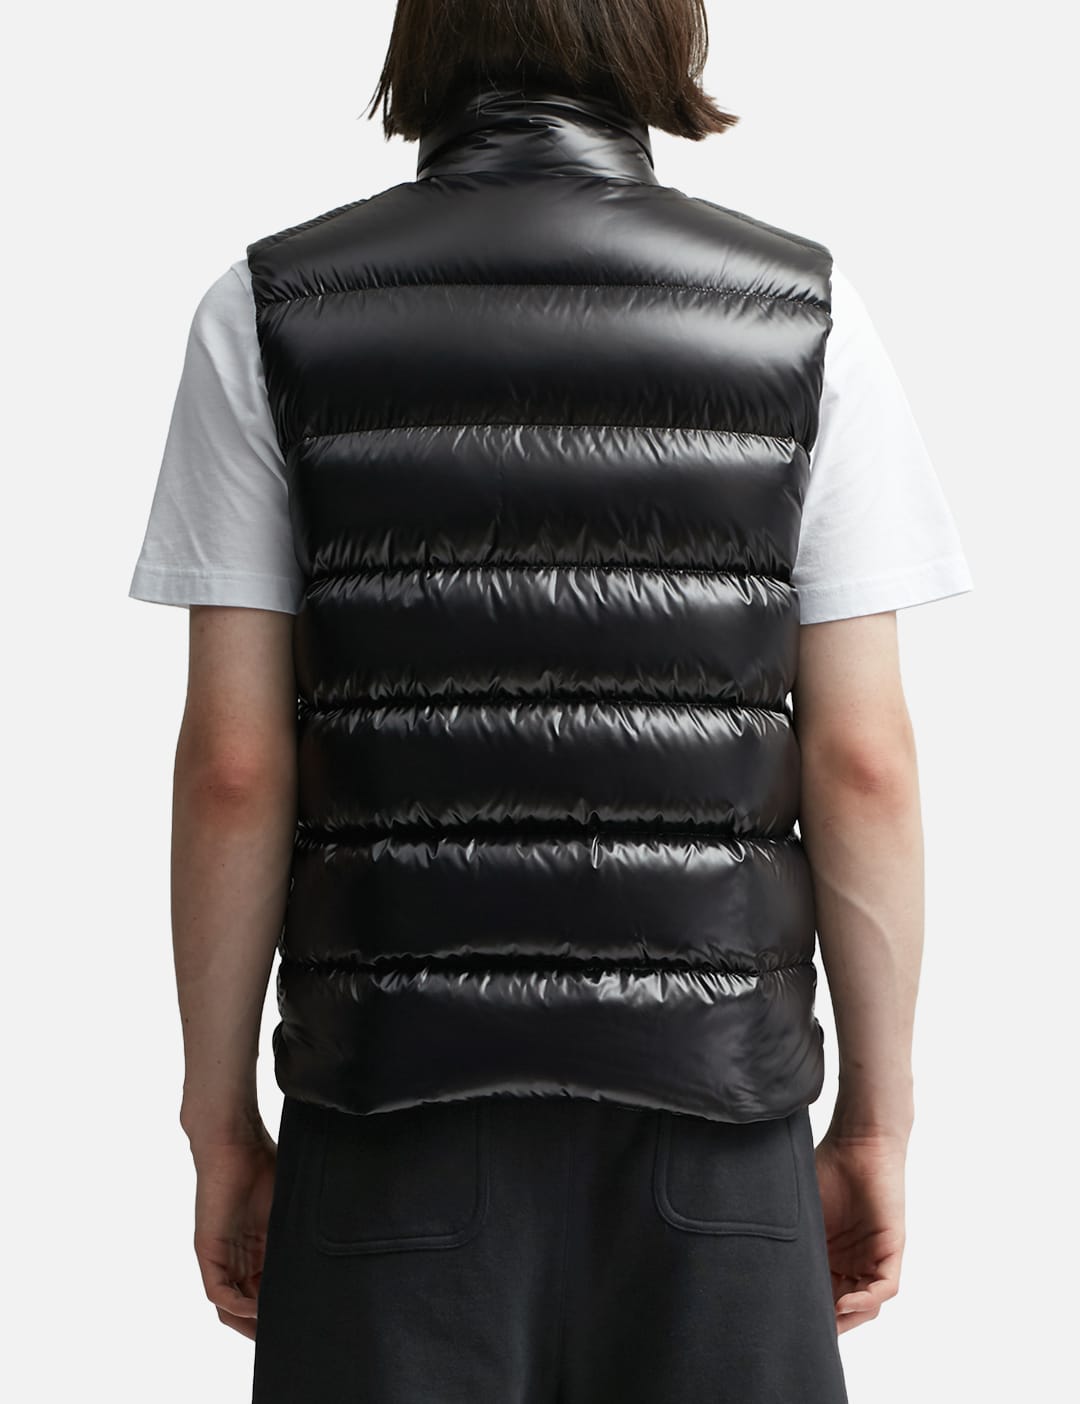 Moncler - TIBB DOWN VEST | HBX - Globally Curated Fashion and